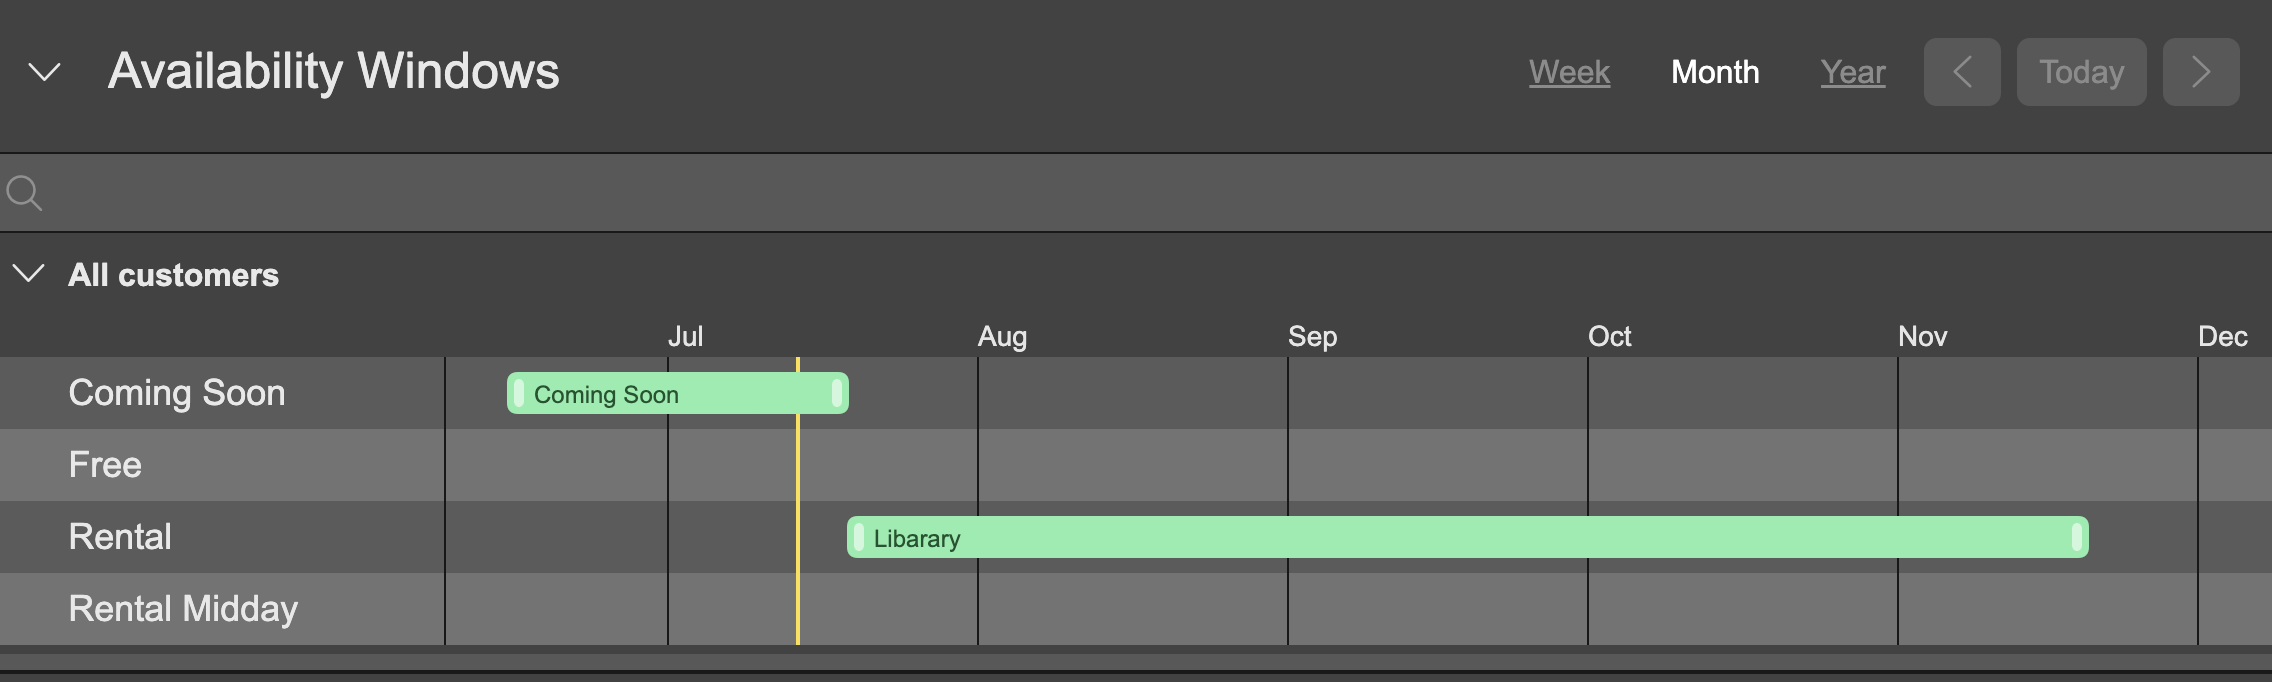 Click Month to see the timeline in months (default view)